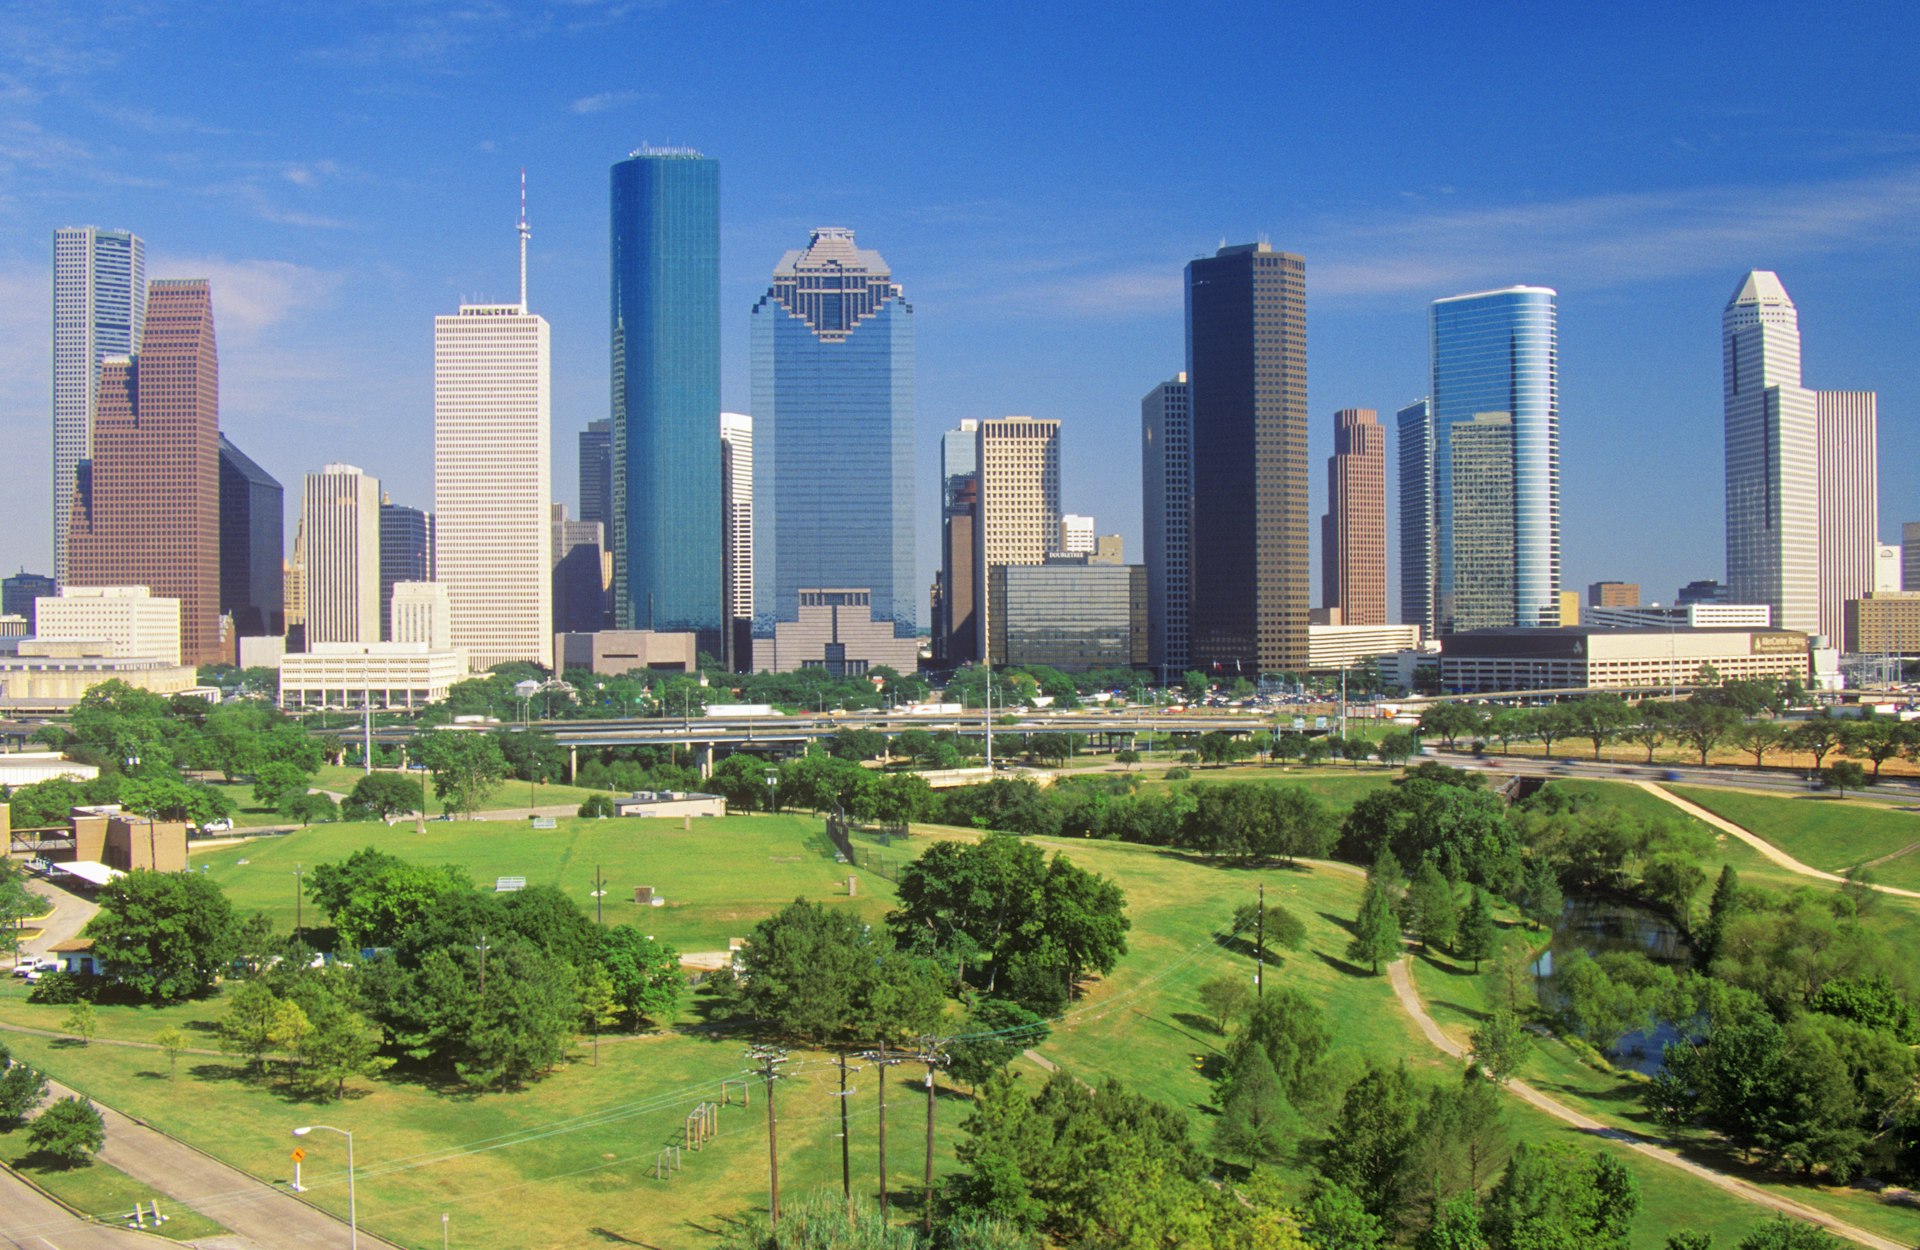 A distant view of Houston's skyline in the afternoon with Memorial Park in the foreground. The park is an expansive carpet of green, dotted with trees.